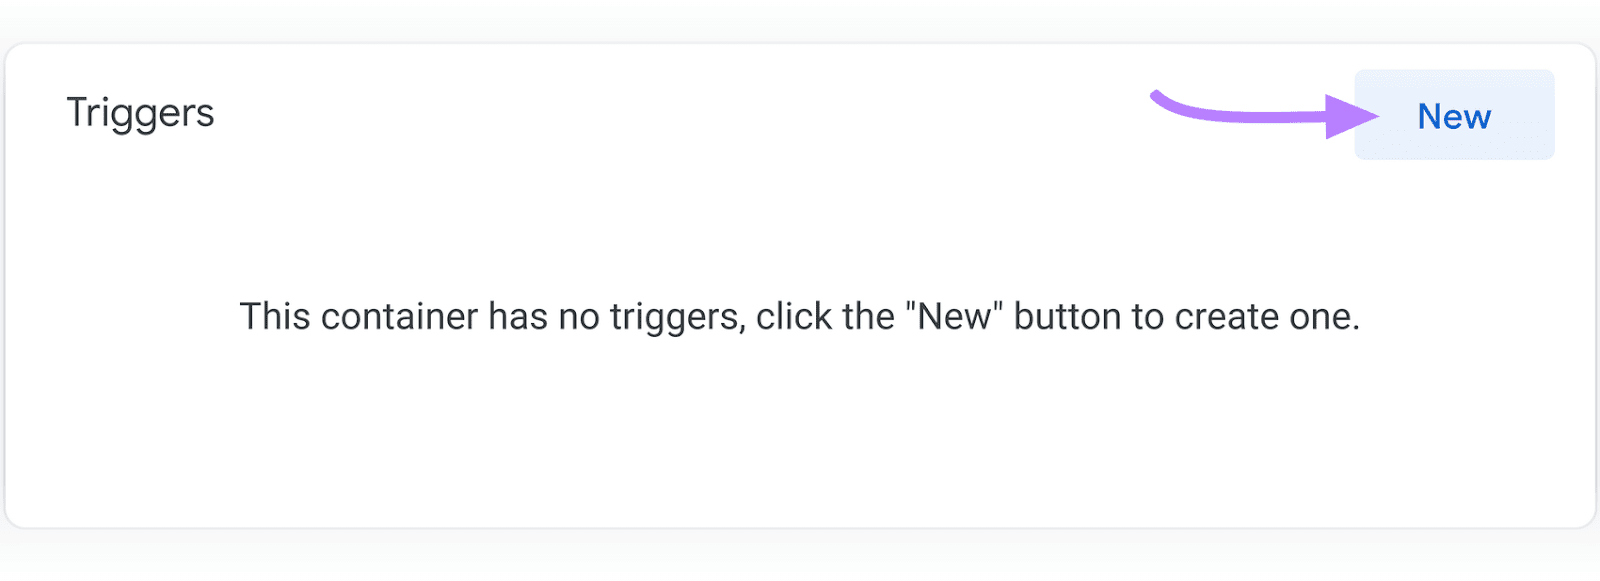 "New" button highlighted under "Triggers" section in GTM